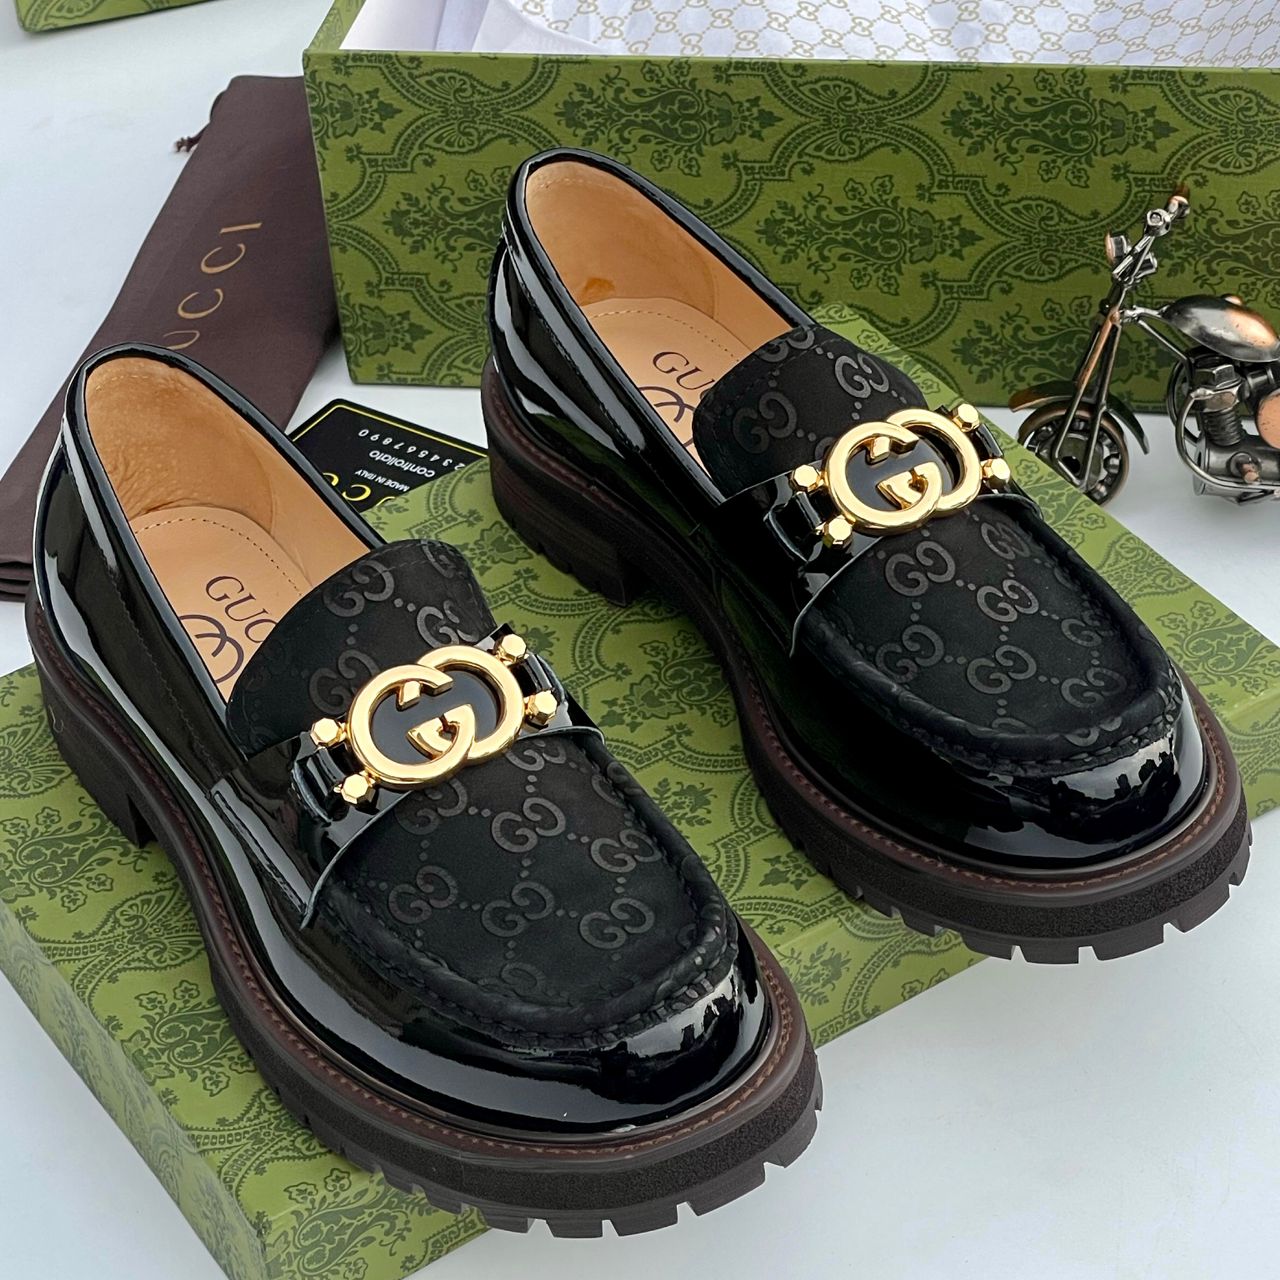 DESIGNERS PREMIUM DOUBLE G LOAFERS for CartRollers Marketplace For Shopping Online, Fashion, Electronics, Phones, Computers and Buy Men Shoe, Home Appliances, Kitchen-wares, Groceries Accessories,ankara, Aso Ebi, Beads, Boys Casual Wears, Children Children's Wears ,Corporate Shoes, Cosmetics Dress ,Dresses Fashion, Girls' Dresses ,Girls' Wears, Hair Care ,Jewelries ,Jewelry Kids, Kids' Fashion Ladies ,Wears Lapel Pins, Loafers Shoe Men ,Men's Caftan, Men's Casual Soes, Men's Fashion, Men's Shoes, Men's Wears, Moccasin Shoe, Natural Hair, In Lagos Nigeria